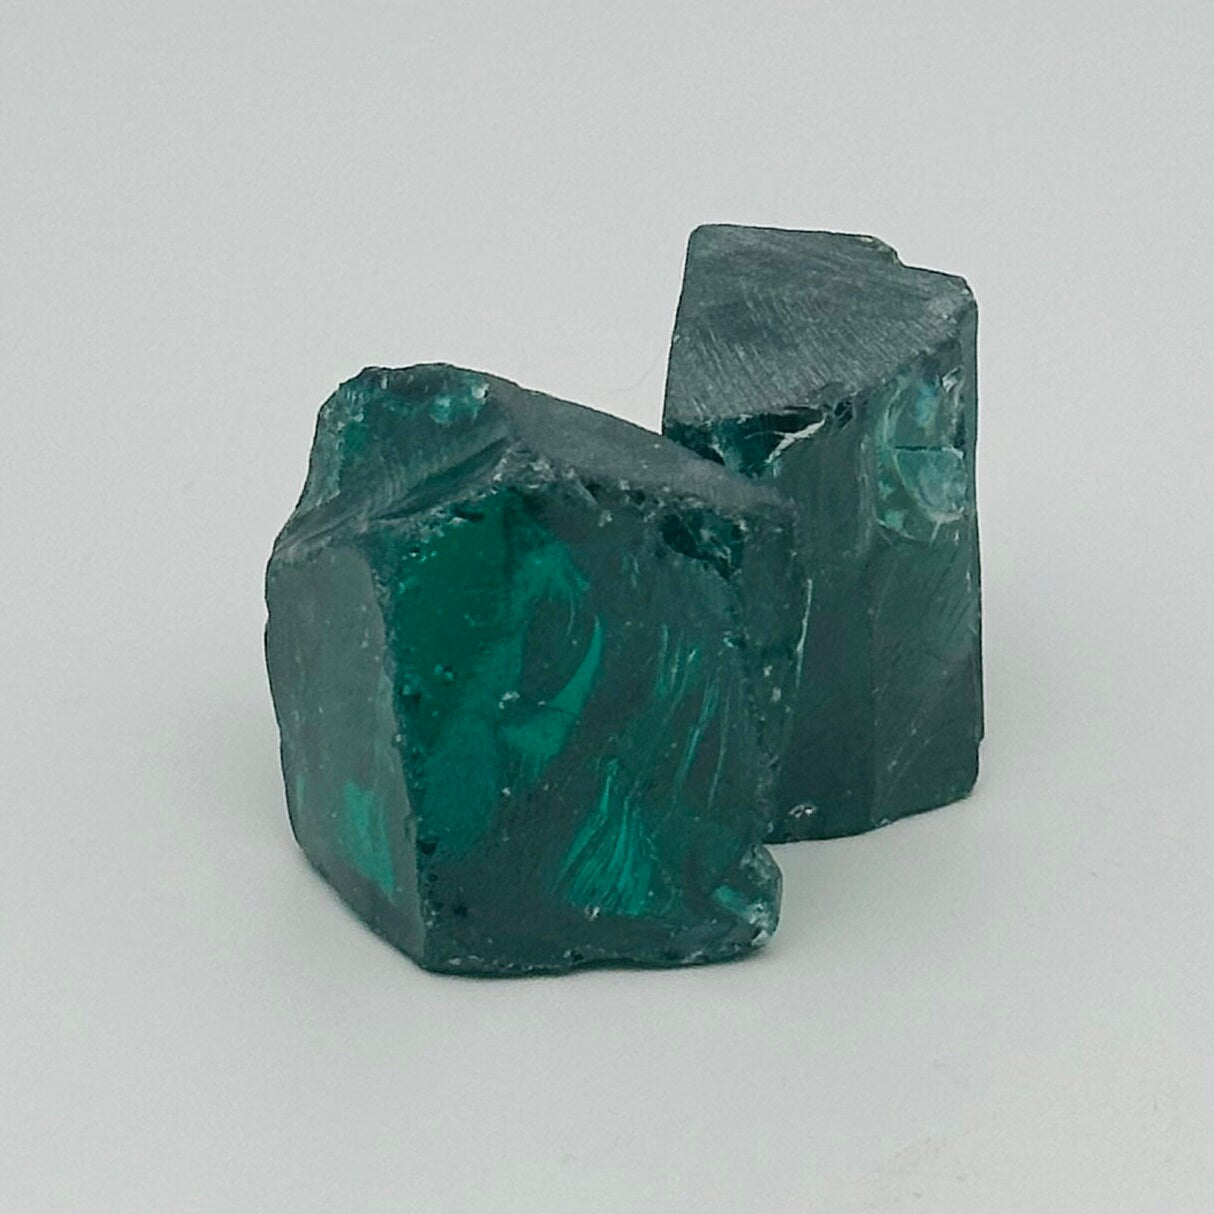 Emerald (Blueish) Cubic Zirconia Faceting Rough for Gem Cutting - Various Sizes